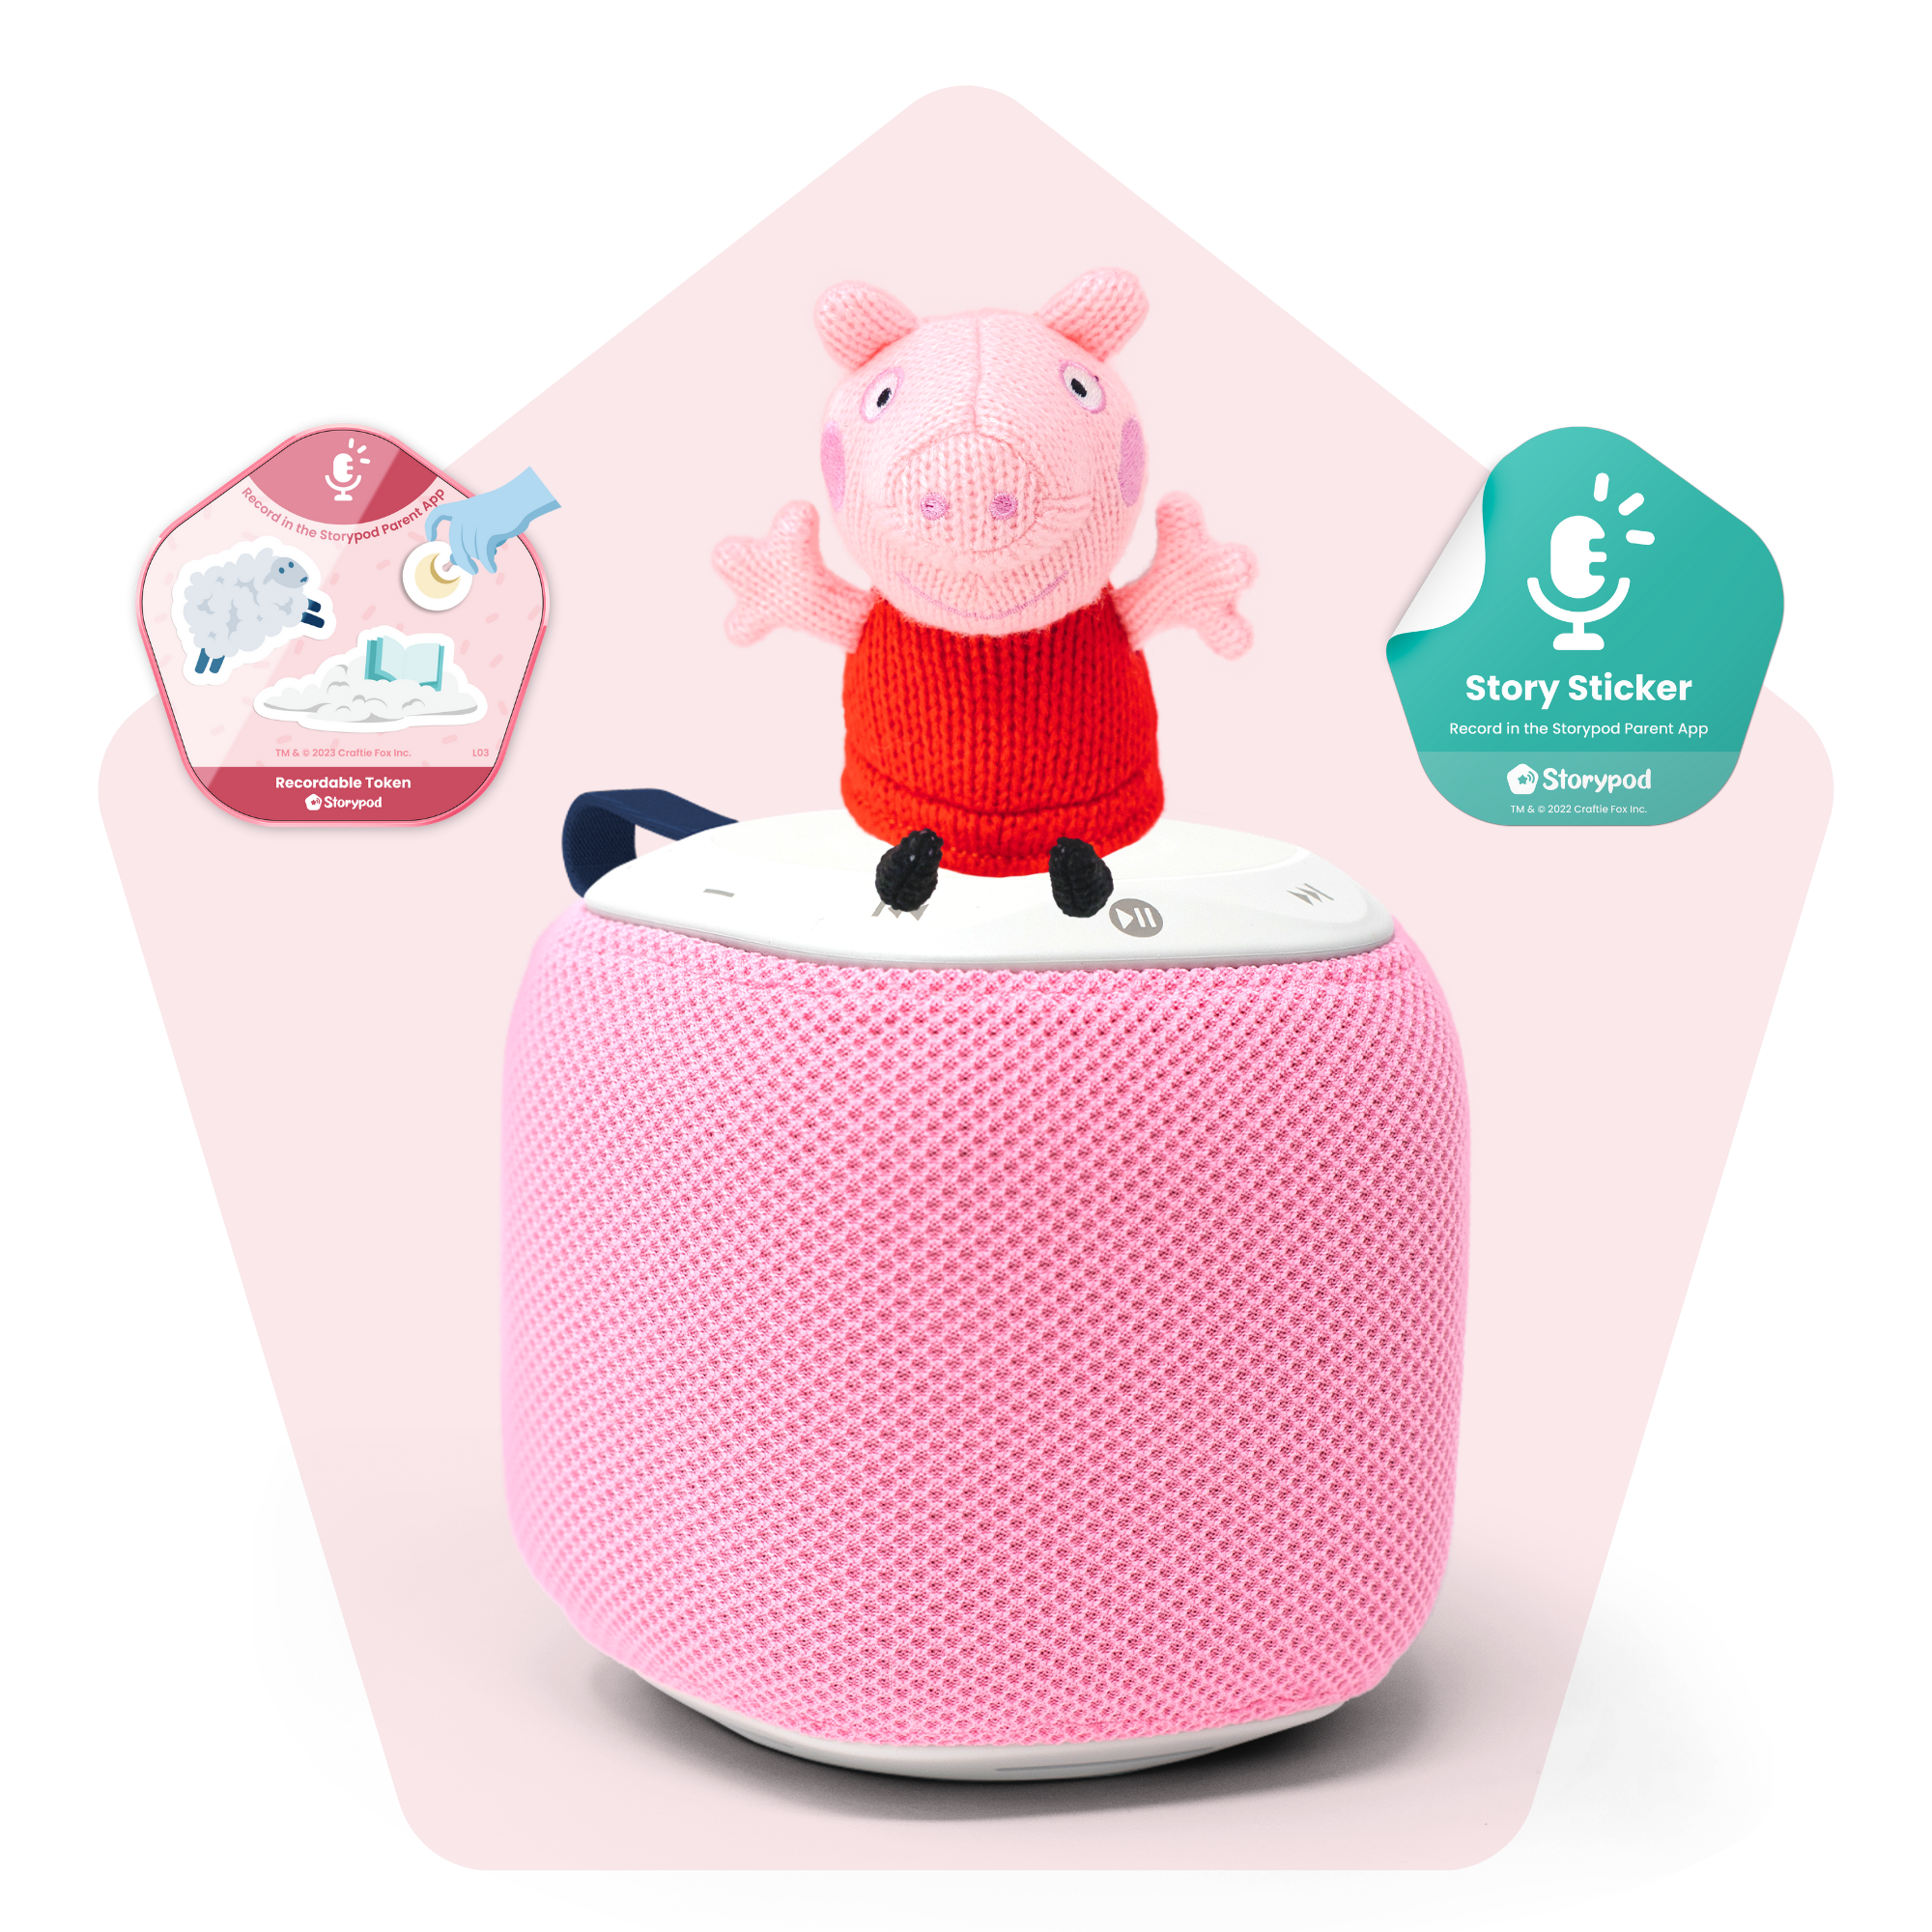 The Storypod Feat. Peppa Pig